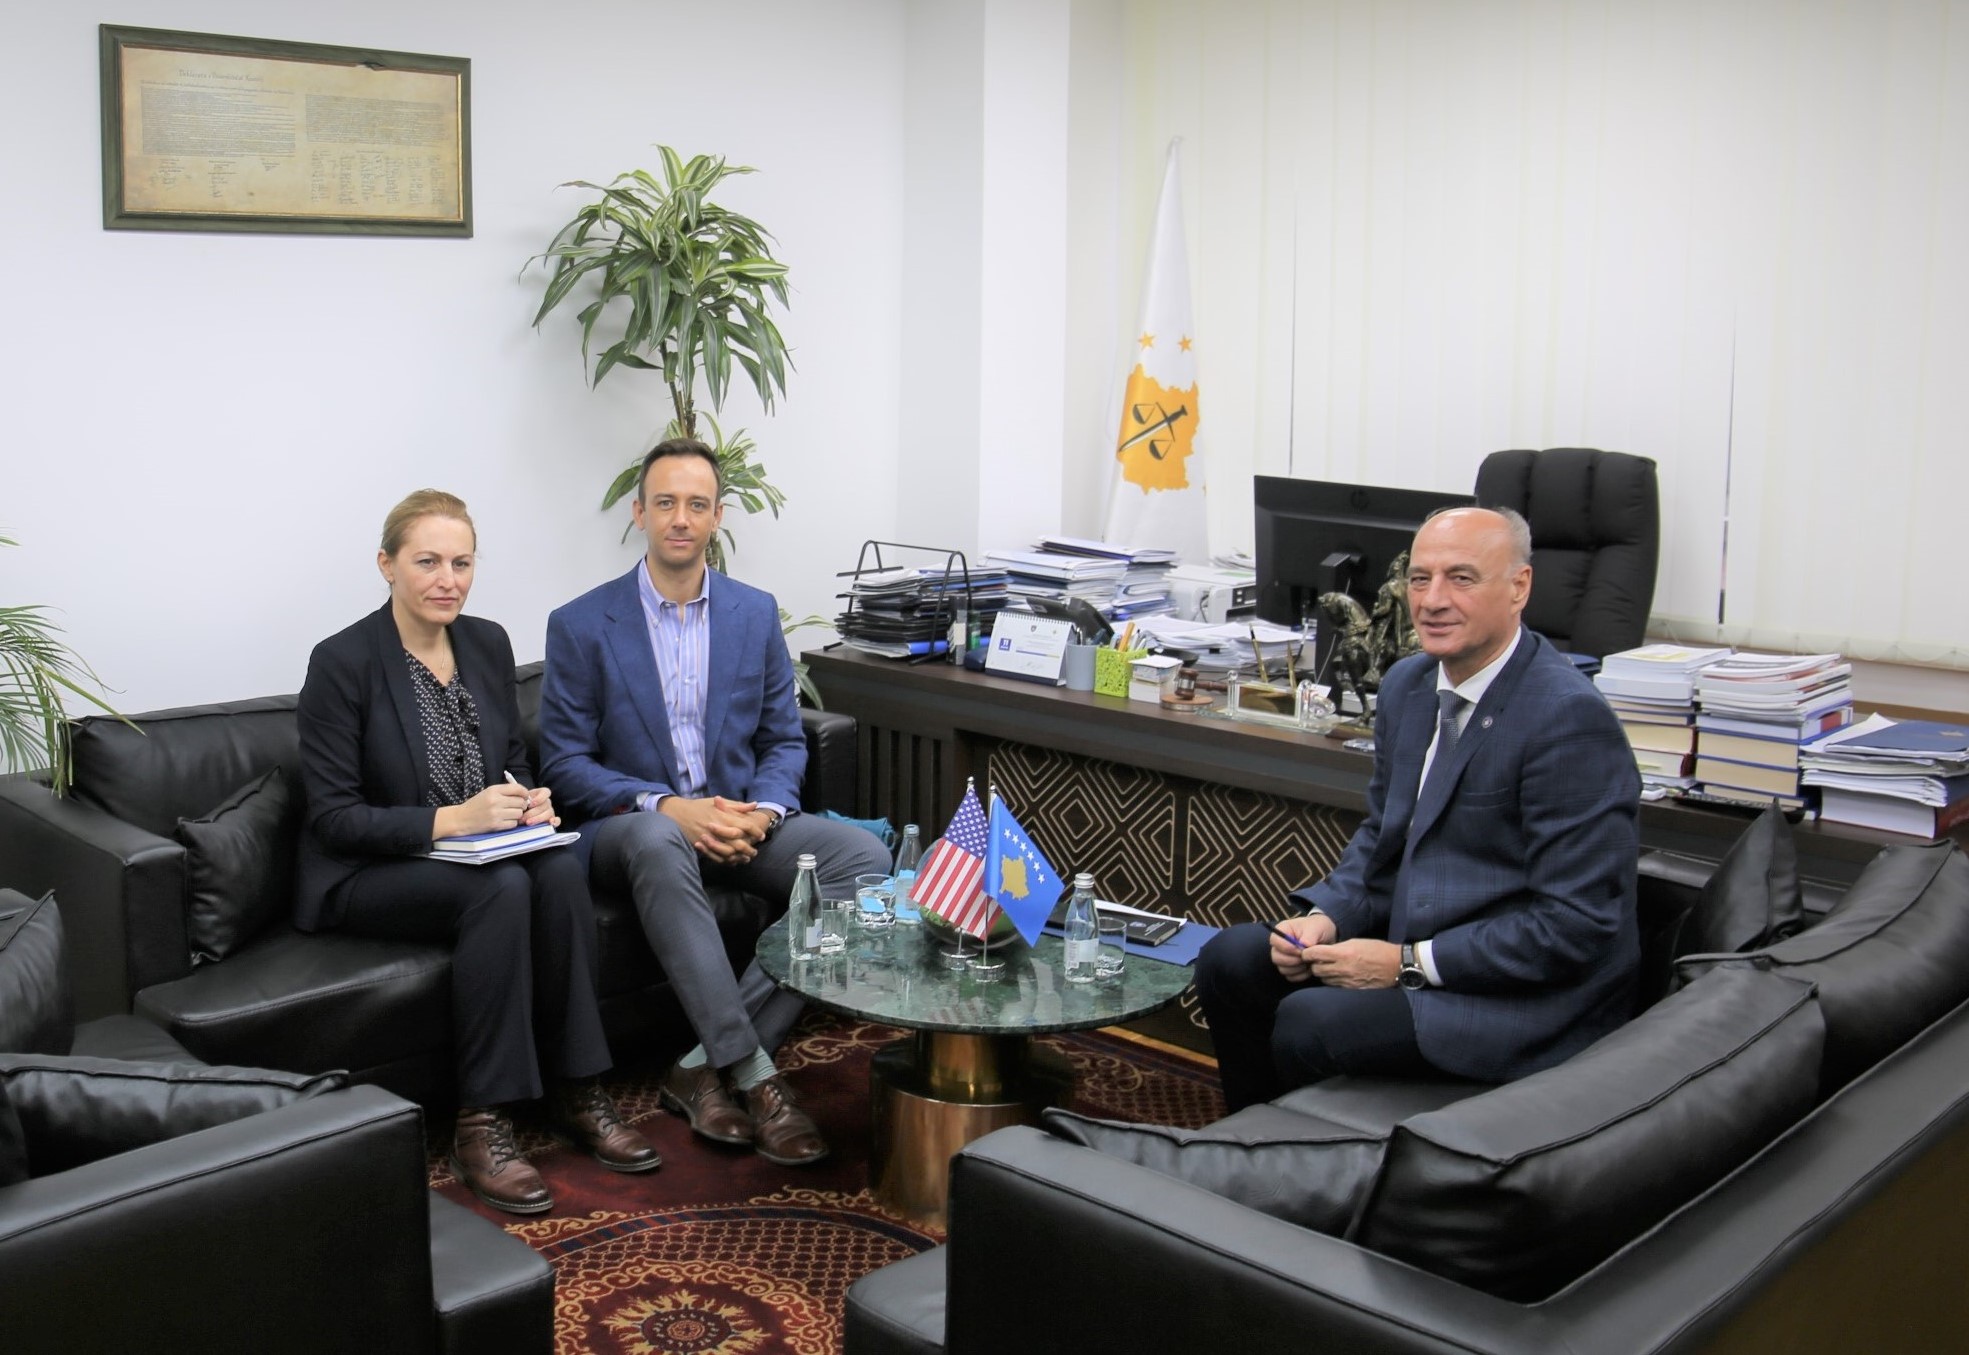 The Chairman of the KPC, Jetish Maloku, hosted the Resident Legal Counselor at the American Embassy, Erin Cox and Senior Legal Officer at OPDAT at the American Embassy, Benina Kusari